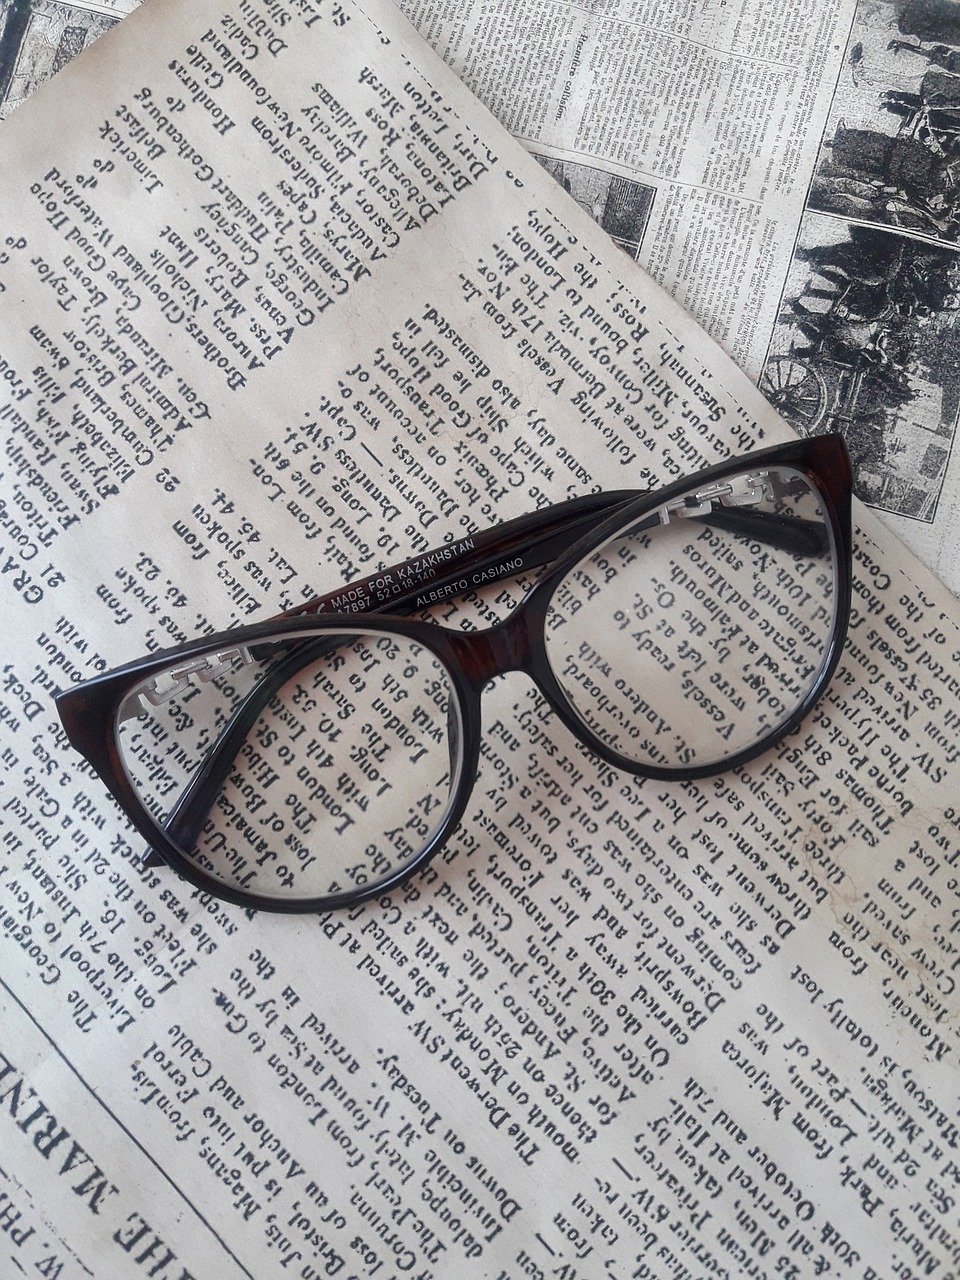 Image of eye glasses sitting on top of a newspaper